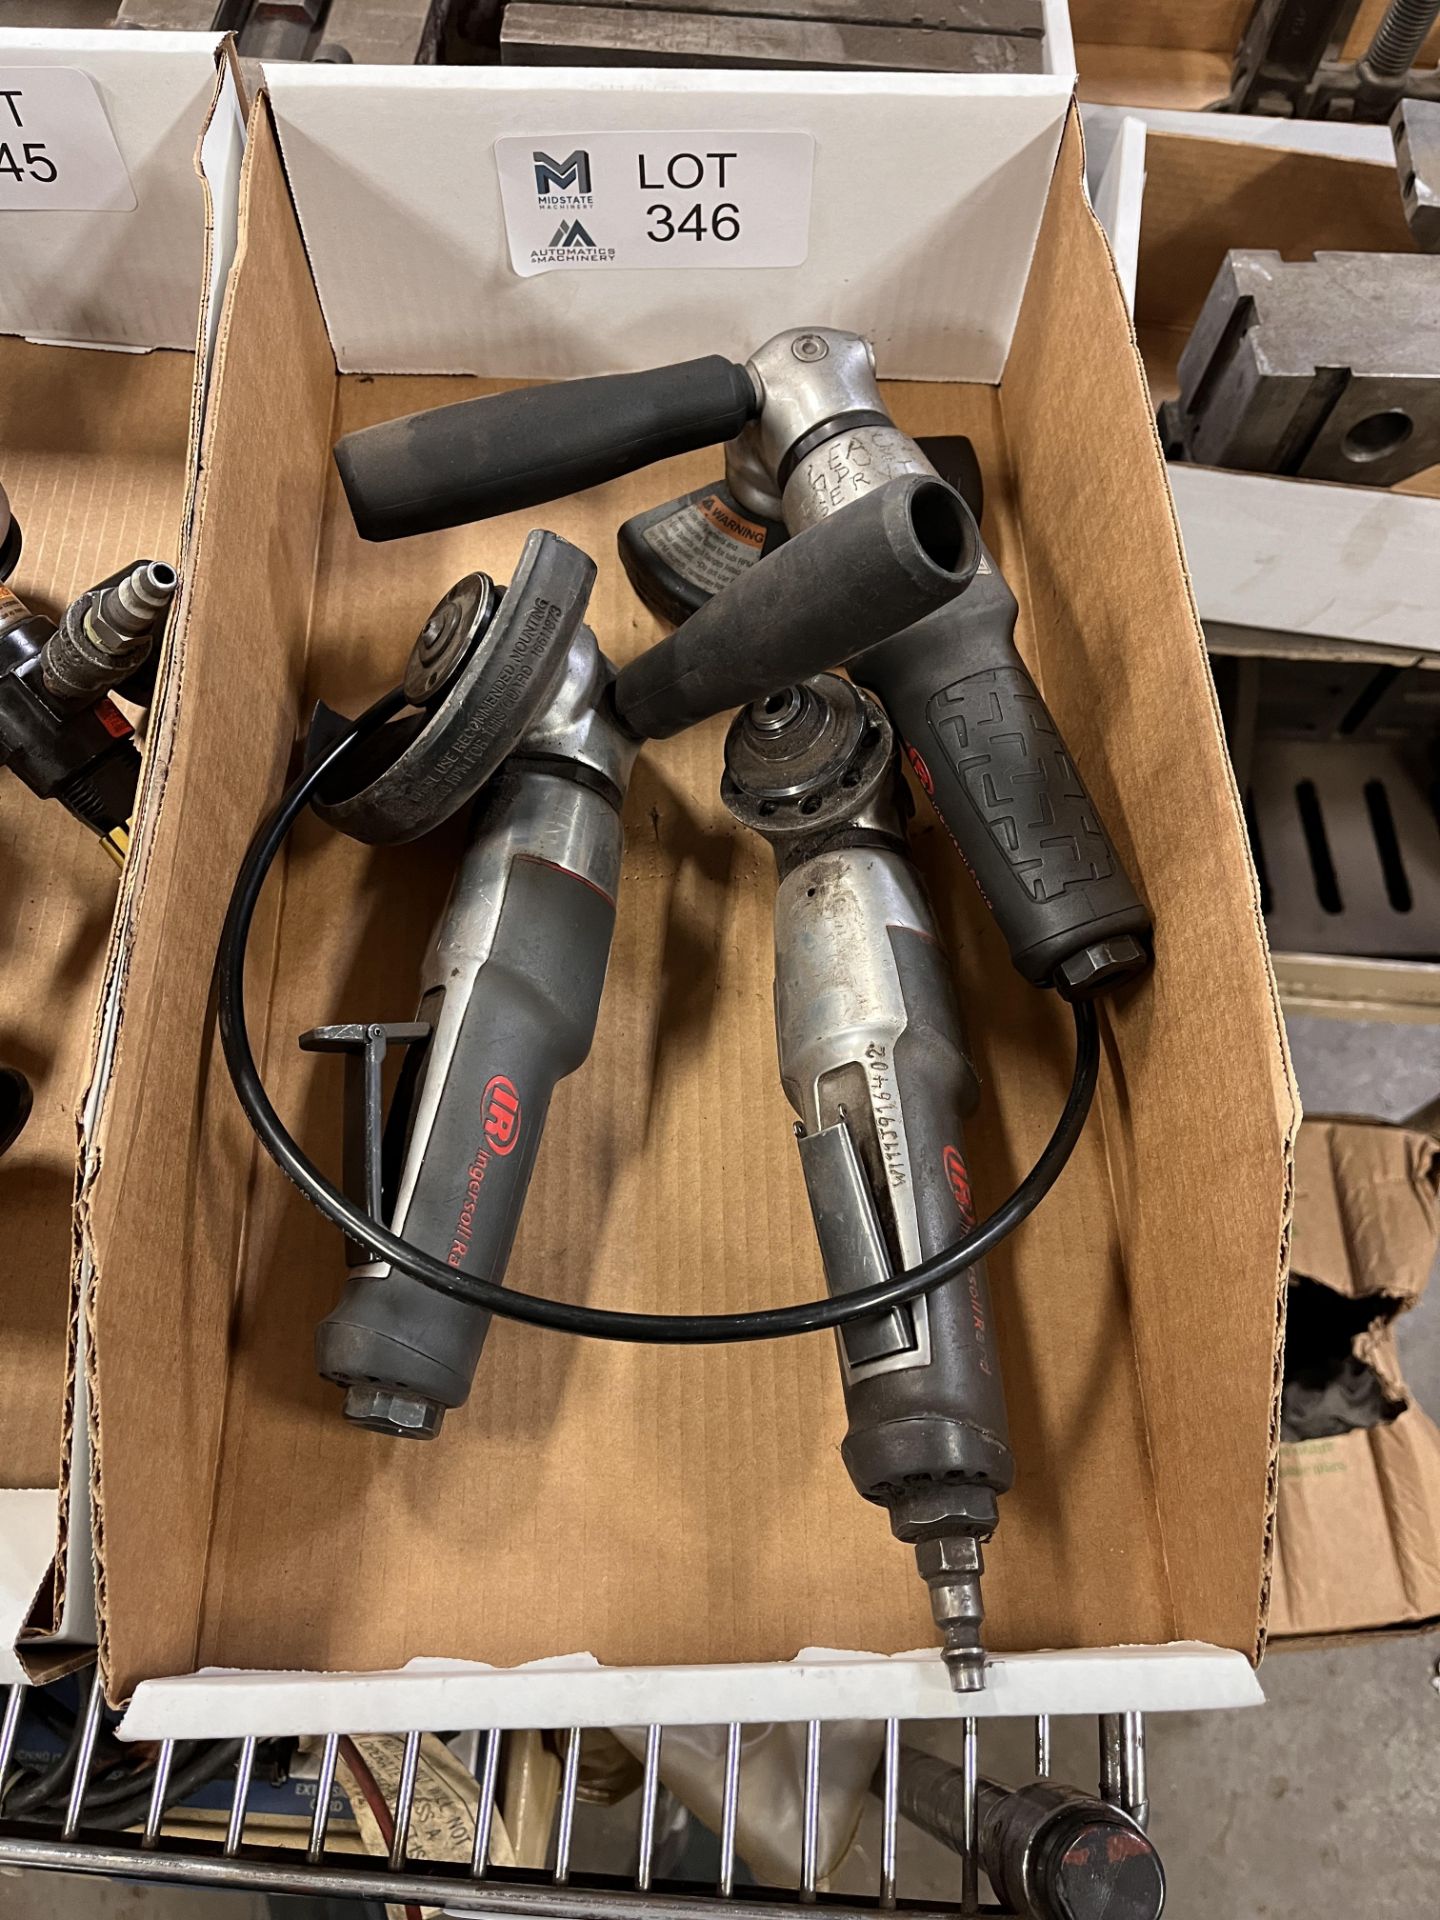 Pneumatic Angle Grinders